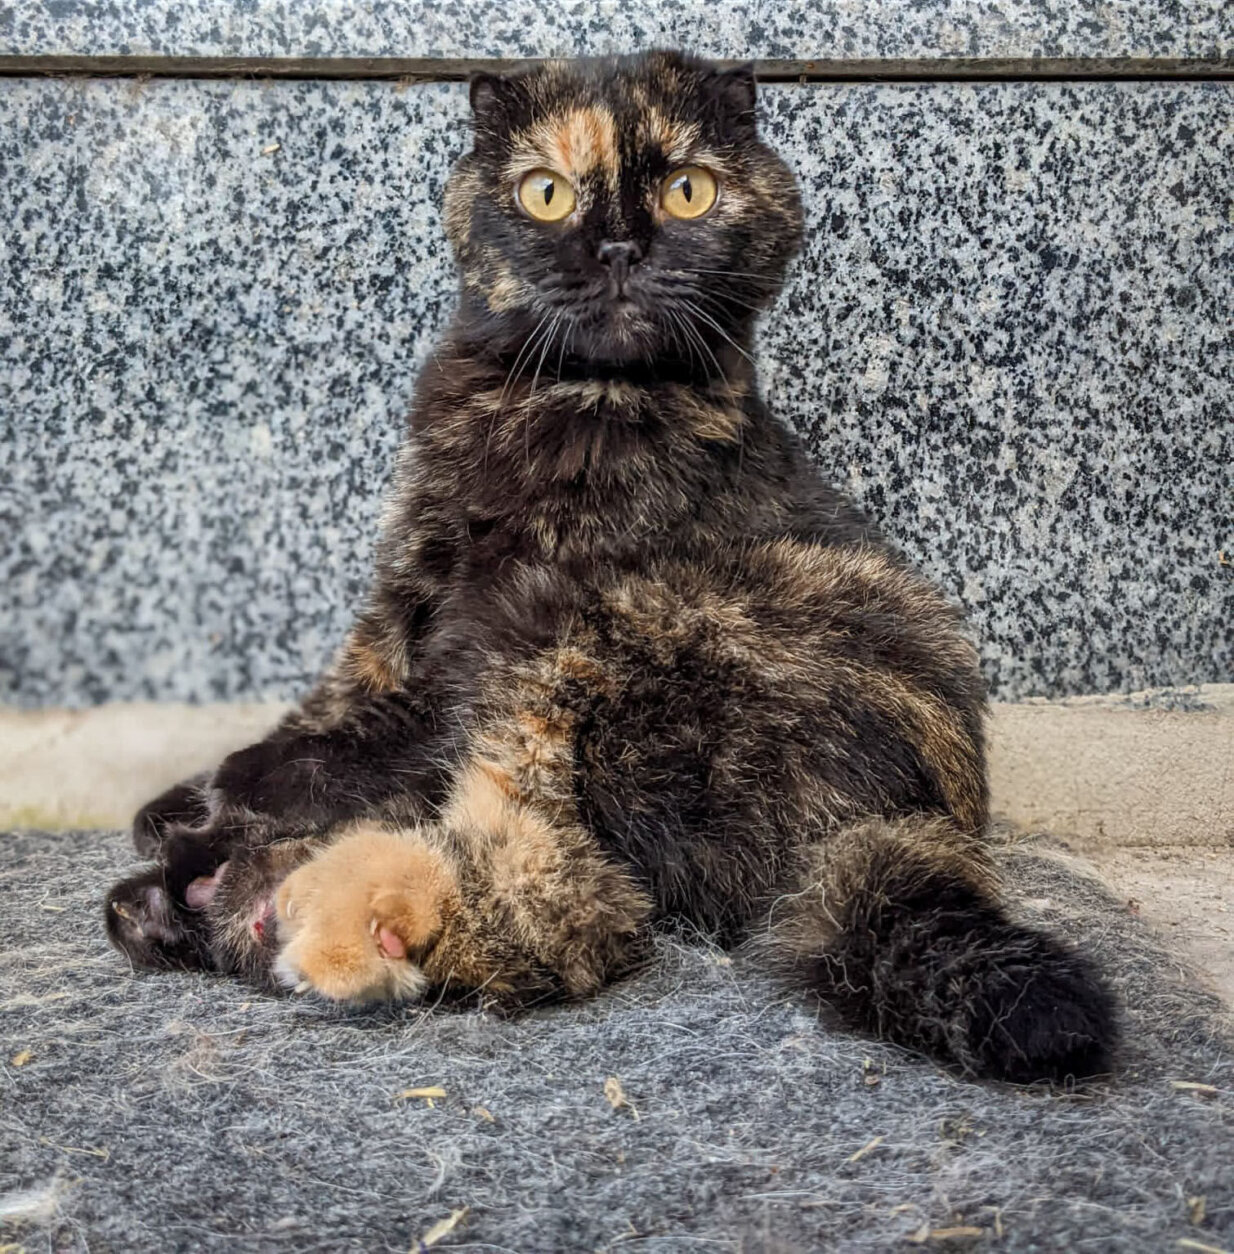 <p>One of the rescued cats, &#8220;Gizmo,&#8221; has tiny ears and deformed feet. &#8220;But she is the cutest, most personable cat. She sits up like a human; she kind of sits on her butt and puts her feet out,&#8221; Bell said.</p>
